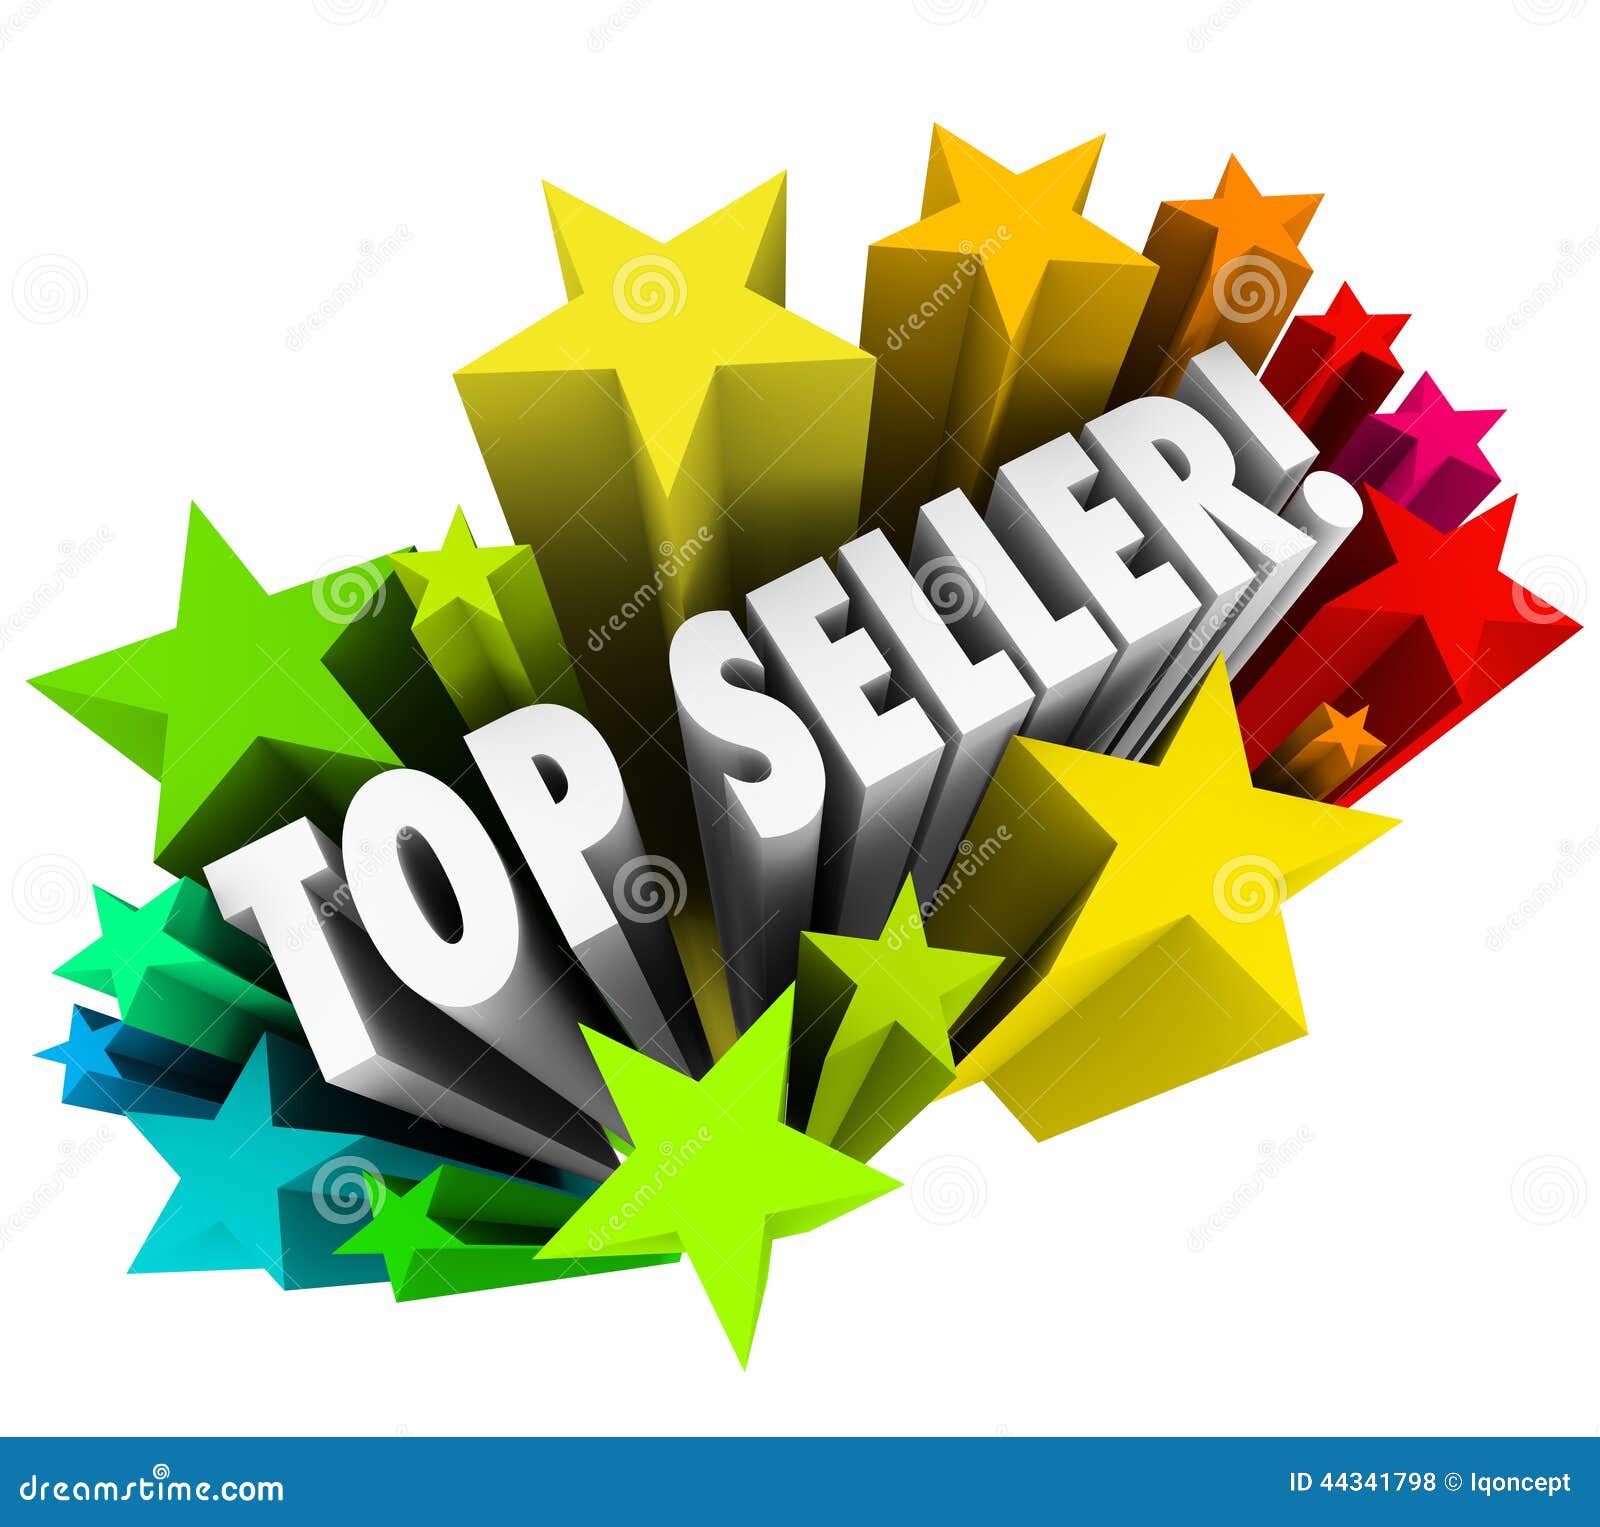 top seller sales person stars best employee worker results